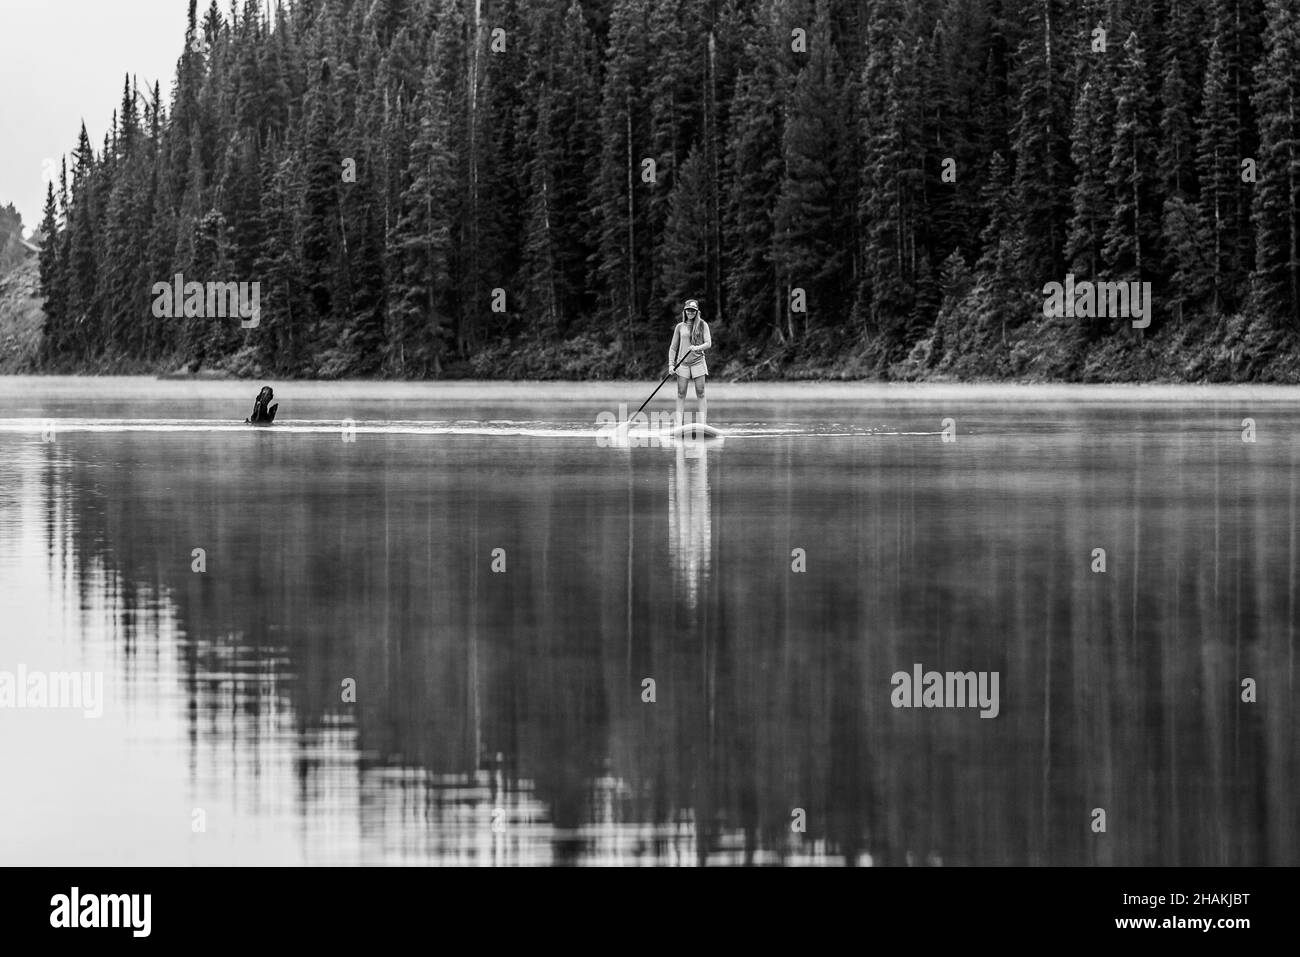 7/14/21 - Crested Butte, Colorado - A woman demonstrates how to do handstands and yoga on an paddle board. Stock Photo